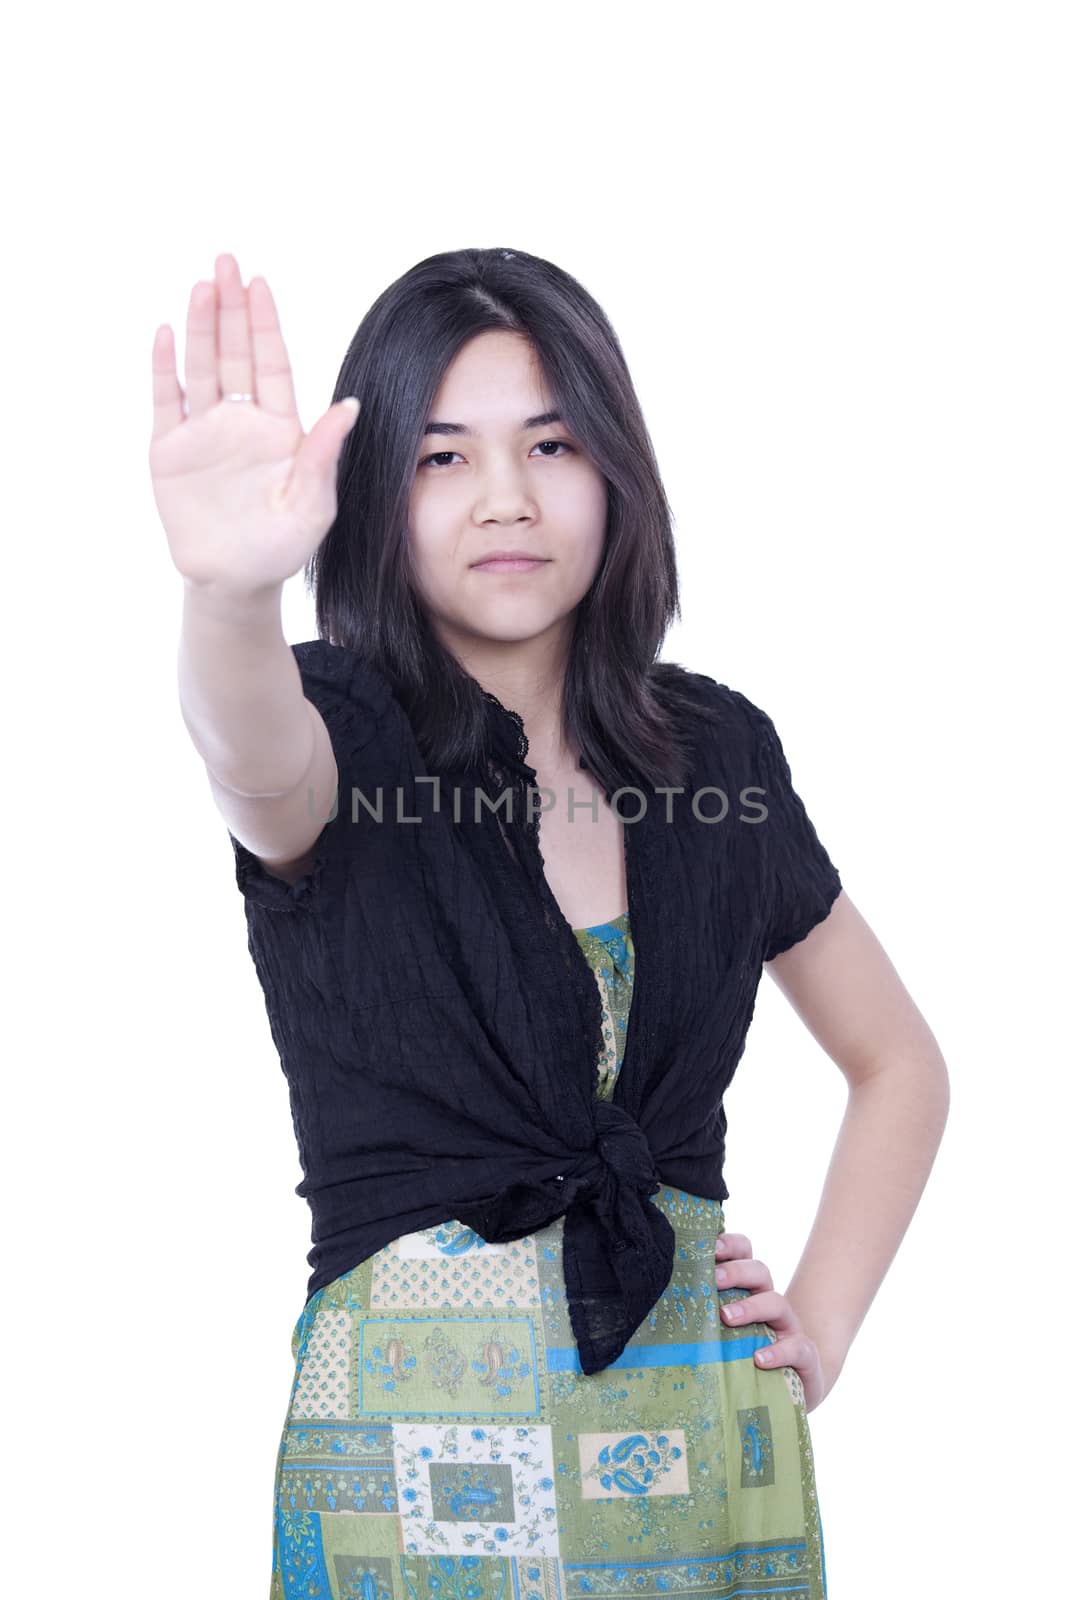 Young biracial teen girl putting hands up to say 'stop', one hand on hip